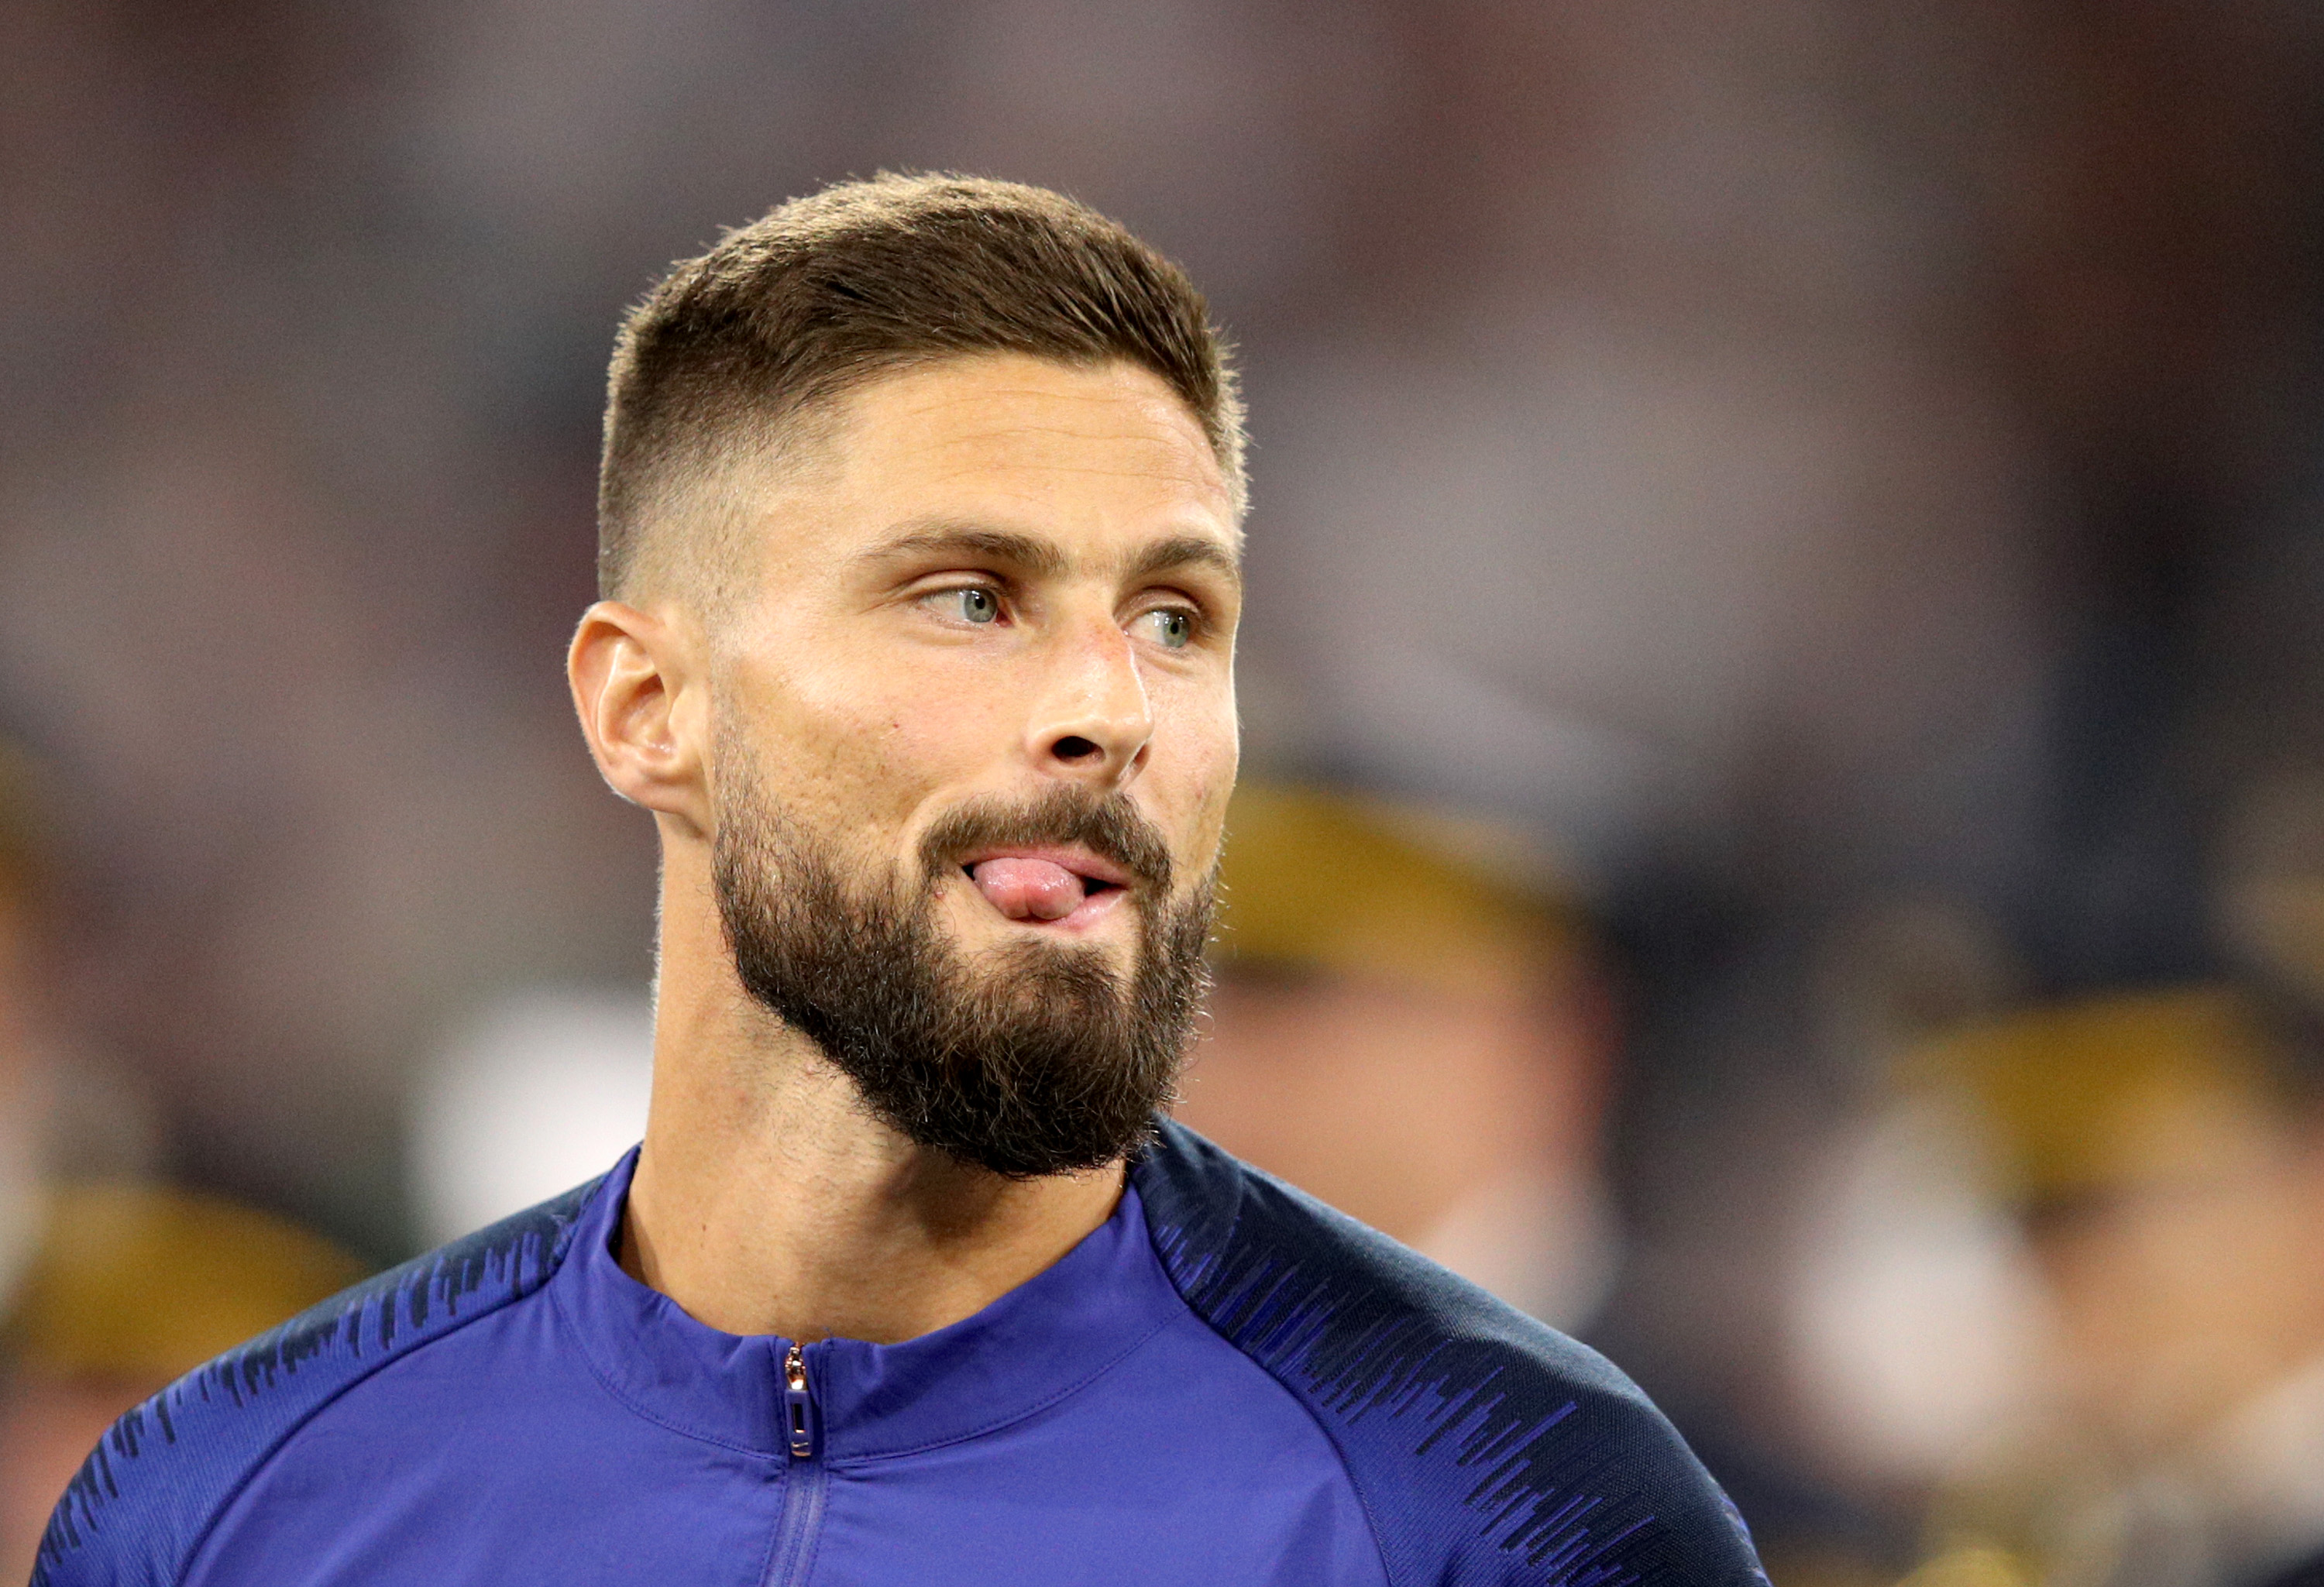 MUNICH, GERMANY - SEPTEMBER 06: Olivier Giroud of France looks on prior to the UEFA Nations League Group A match between Germany and France at Allianz Arena on September 6, 2018 in Munich, Germany.  (Photo by Adam Pretty/Bongarts/Getty Images)